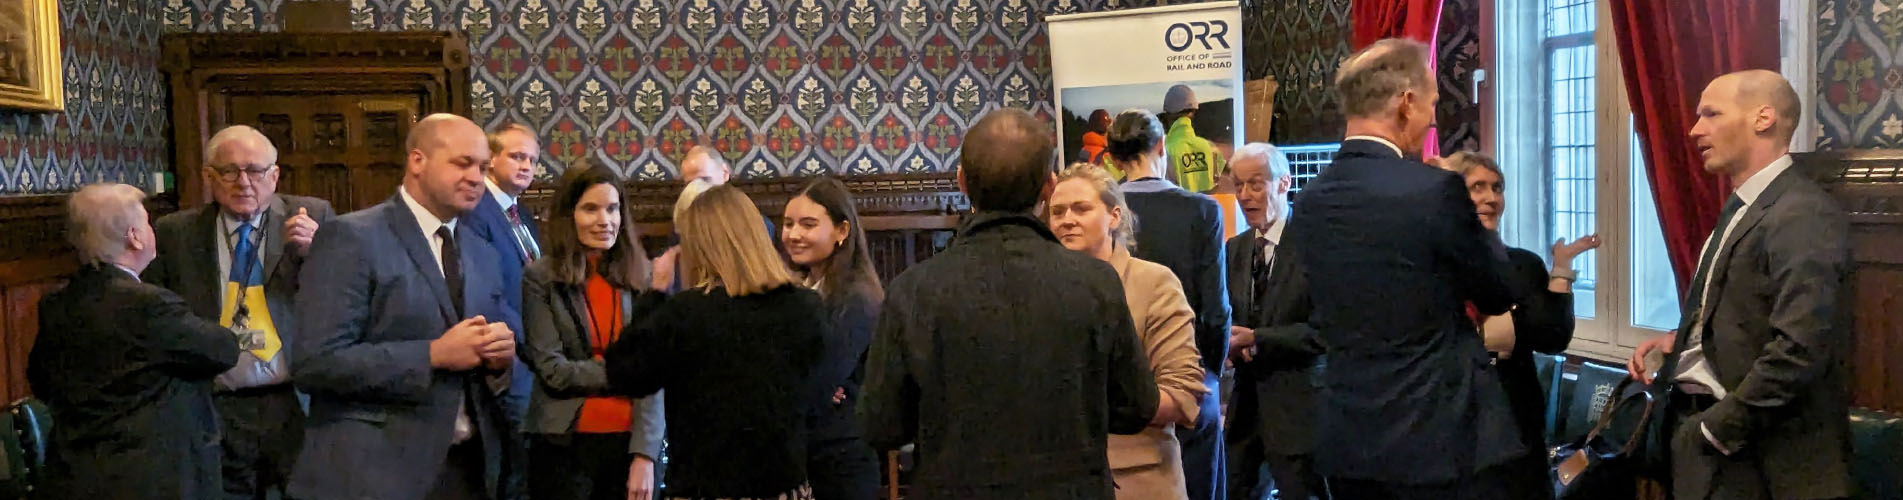 Members of the ORR senior team answering questions at a parliamentary drop-in session